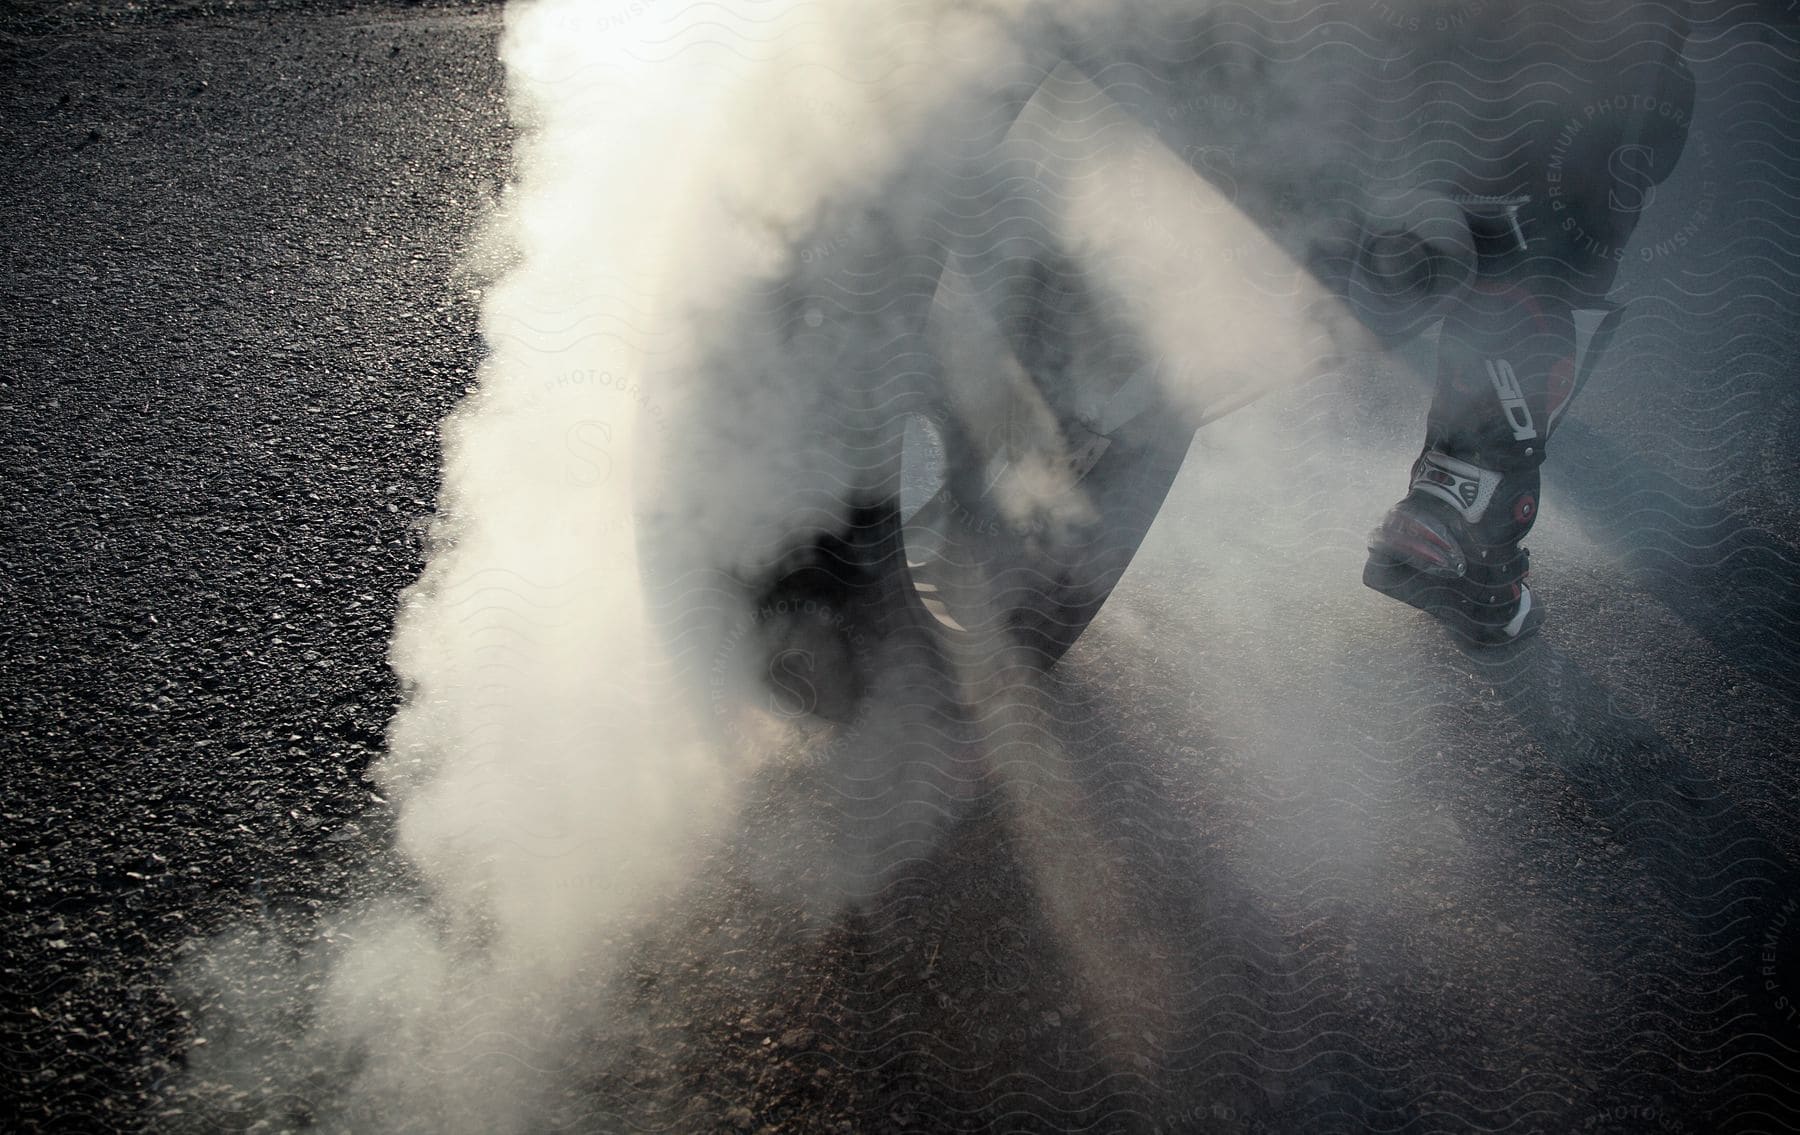 A closeup of a persons feet on a motorcycle as the tire smokes